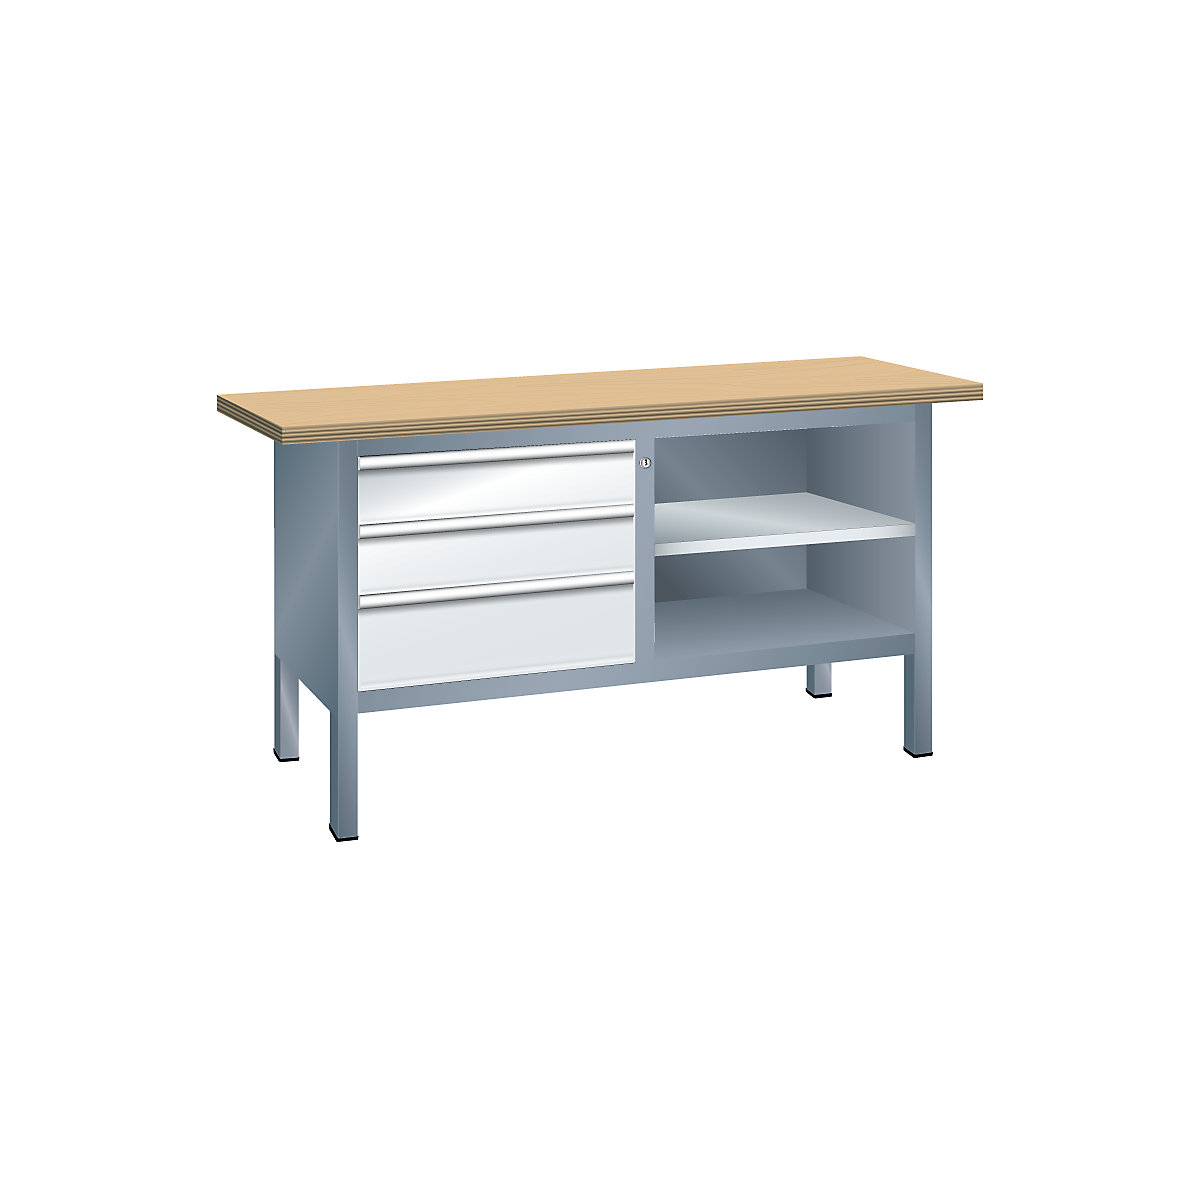 Workbench with multiplex panel, frame construction – LISTA, 3 drawers, 2 shelves, body grey metallic, front light grey-3